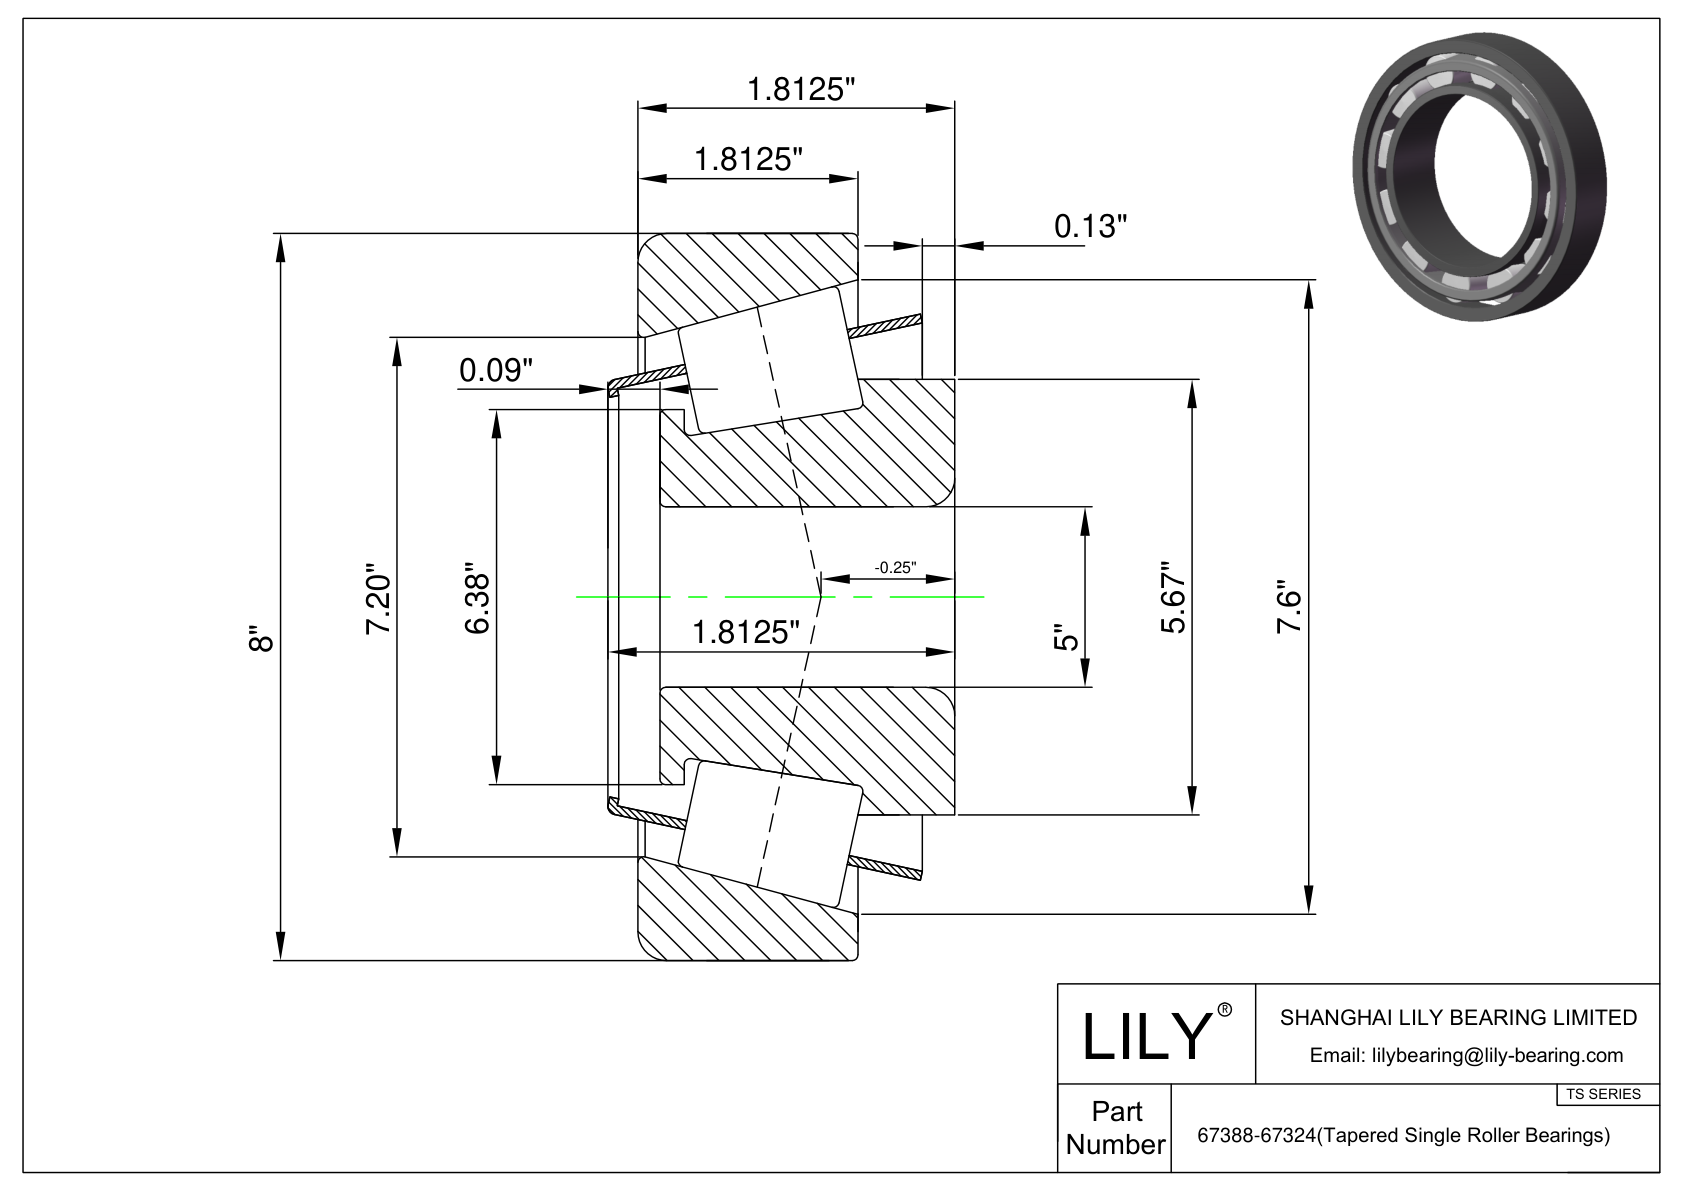 67388-67324 TS (Tapered Single Roller Bearings) (Imperial) cad drawing